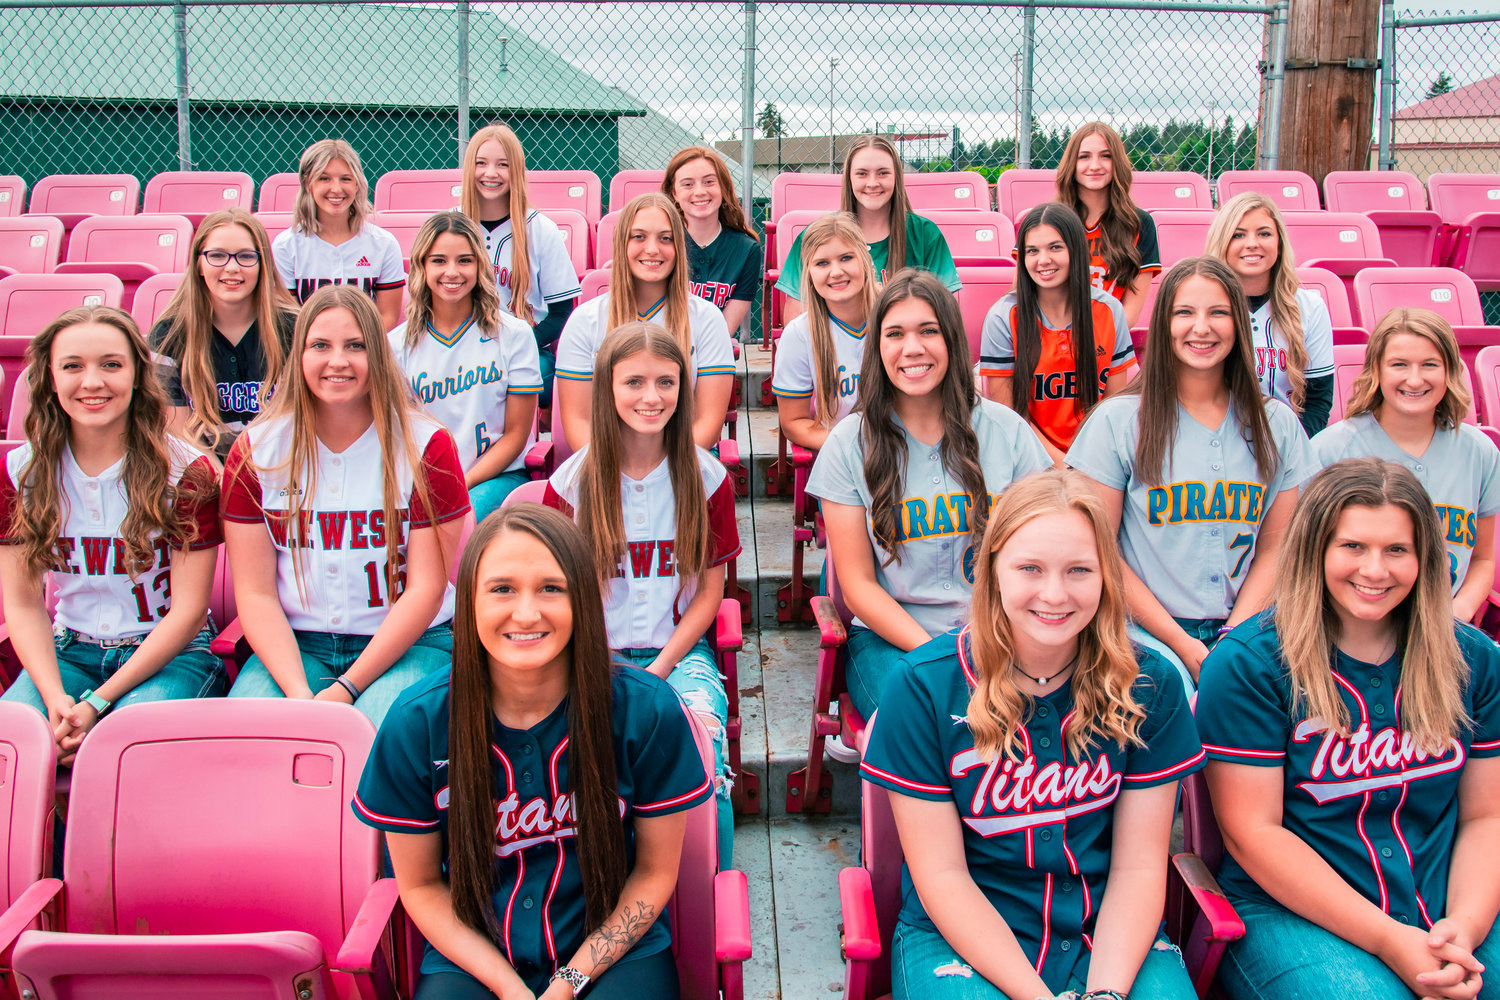 The All-Area Softball team poses for a photo in the stands at Wheeler Field in Centralia on Monday.